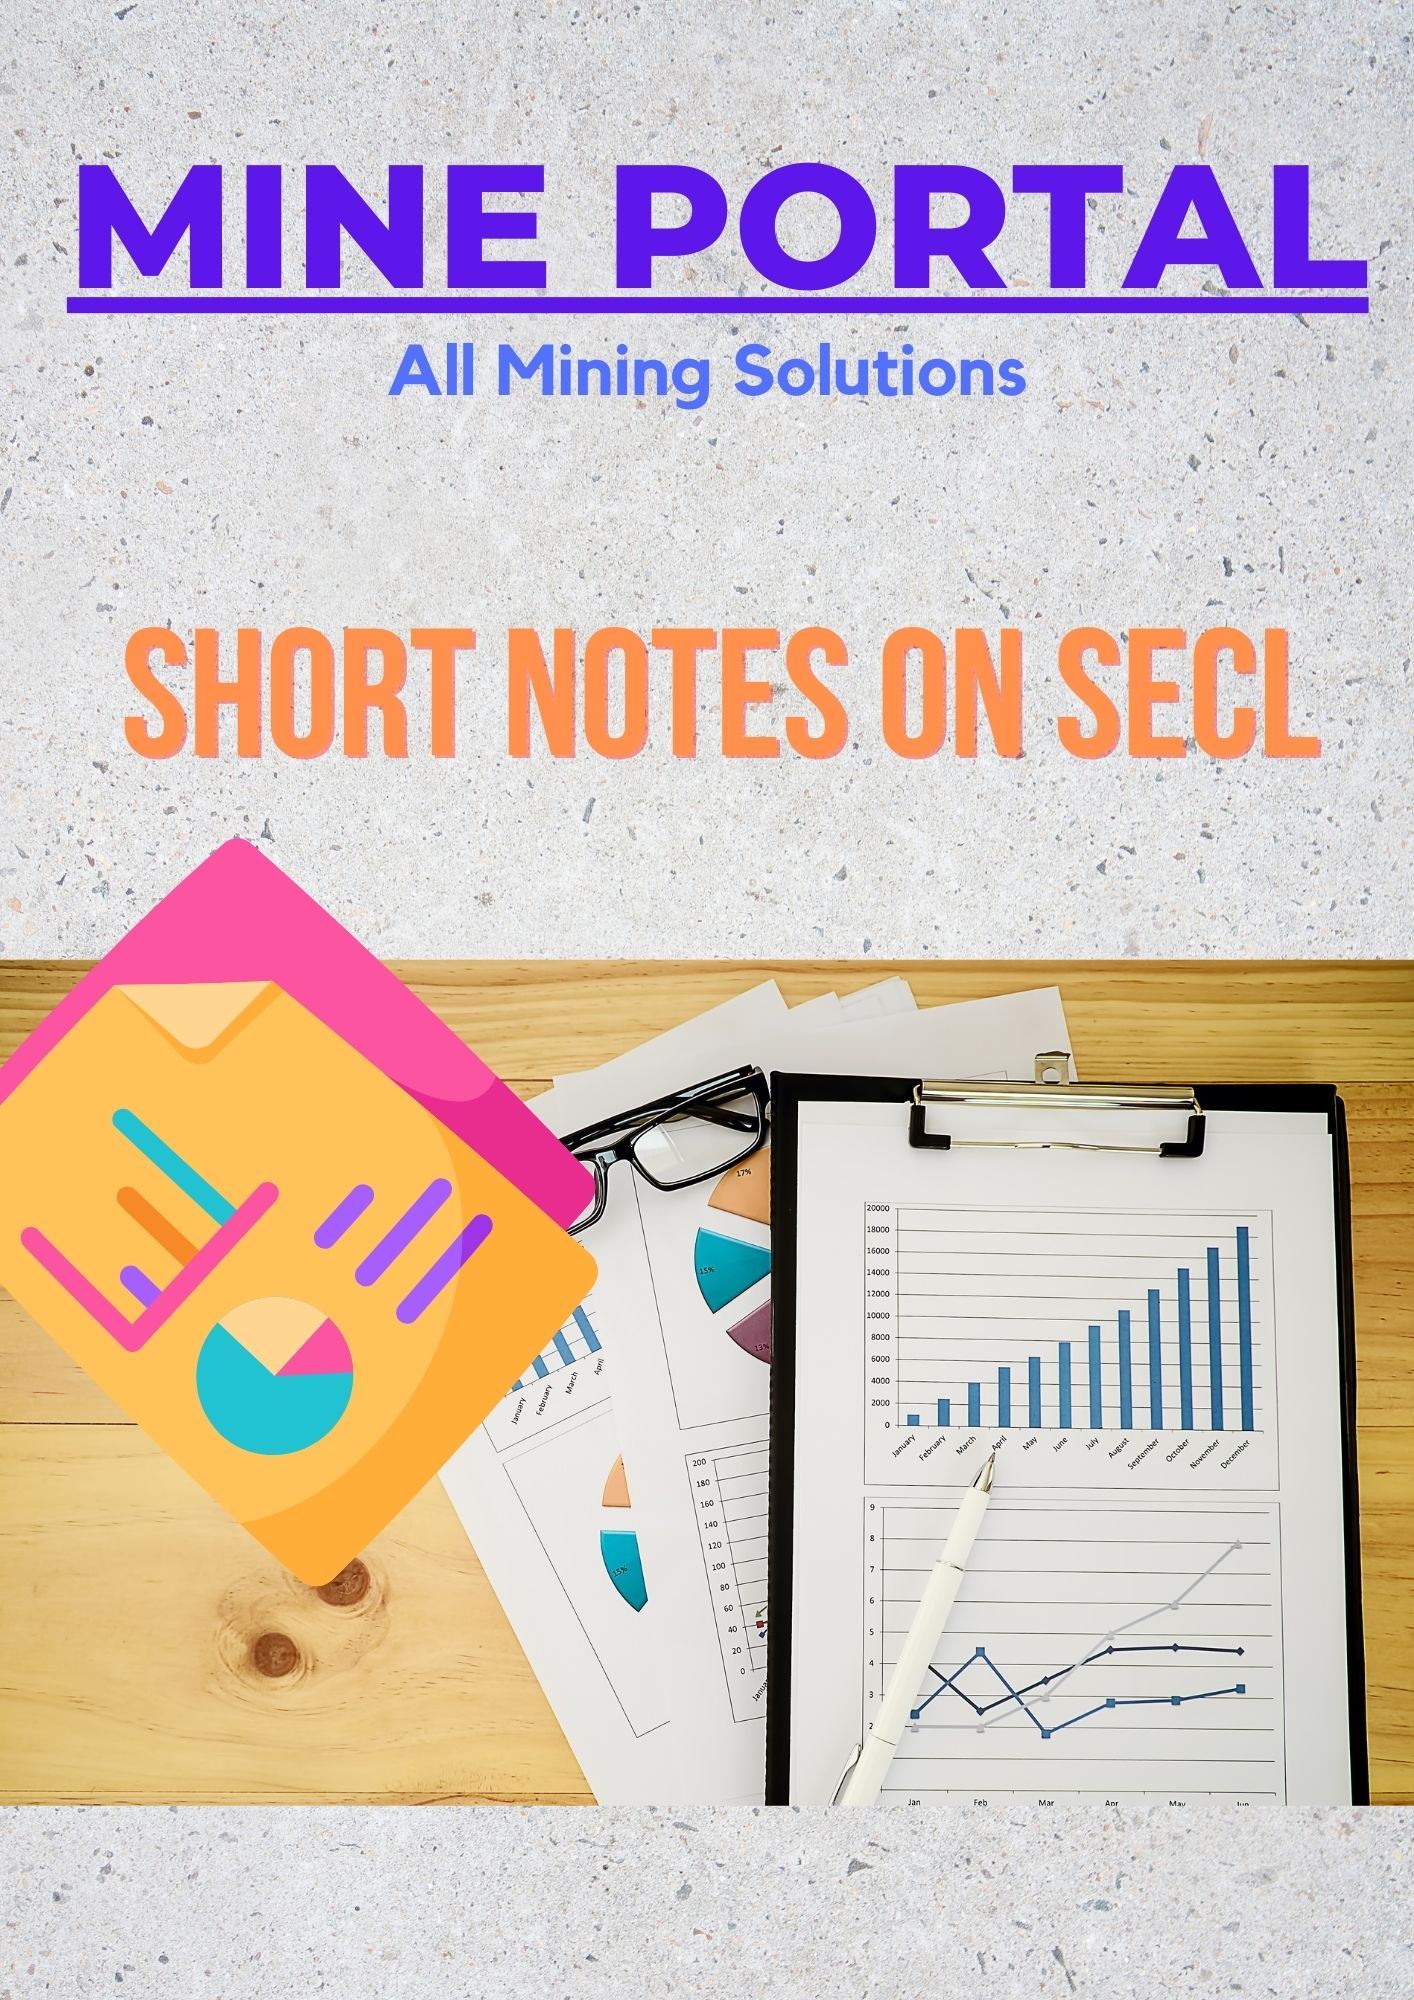 SHORT NOTES ON SECL